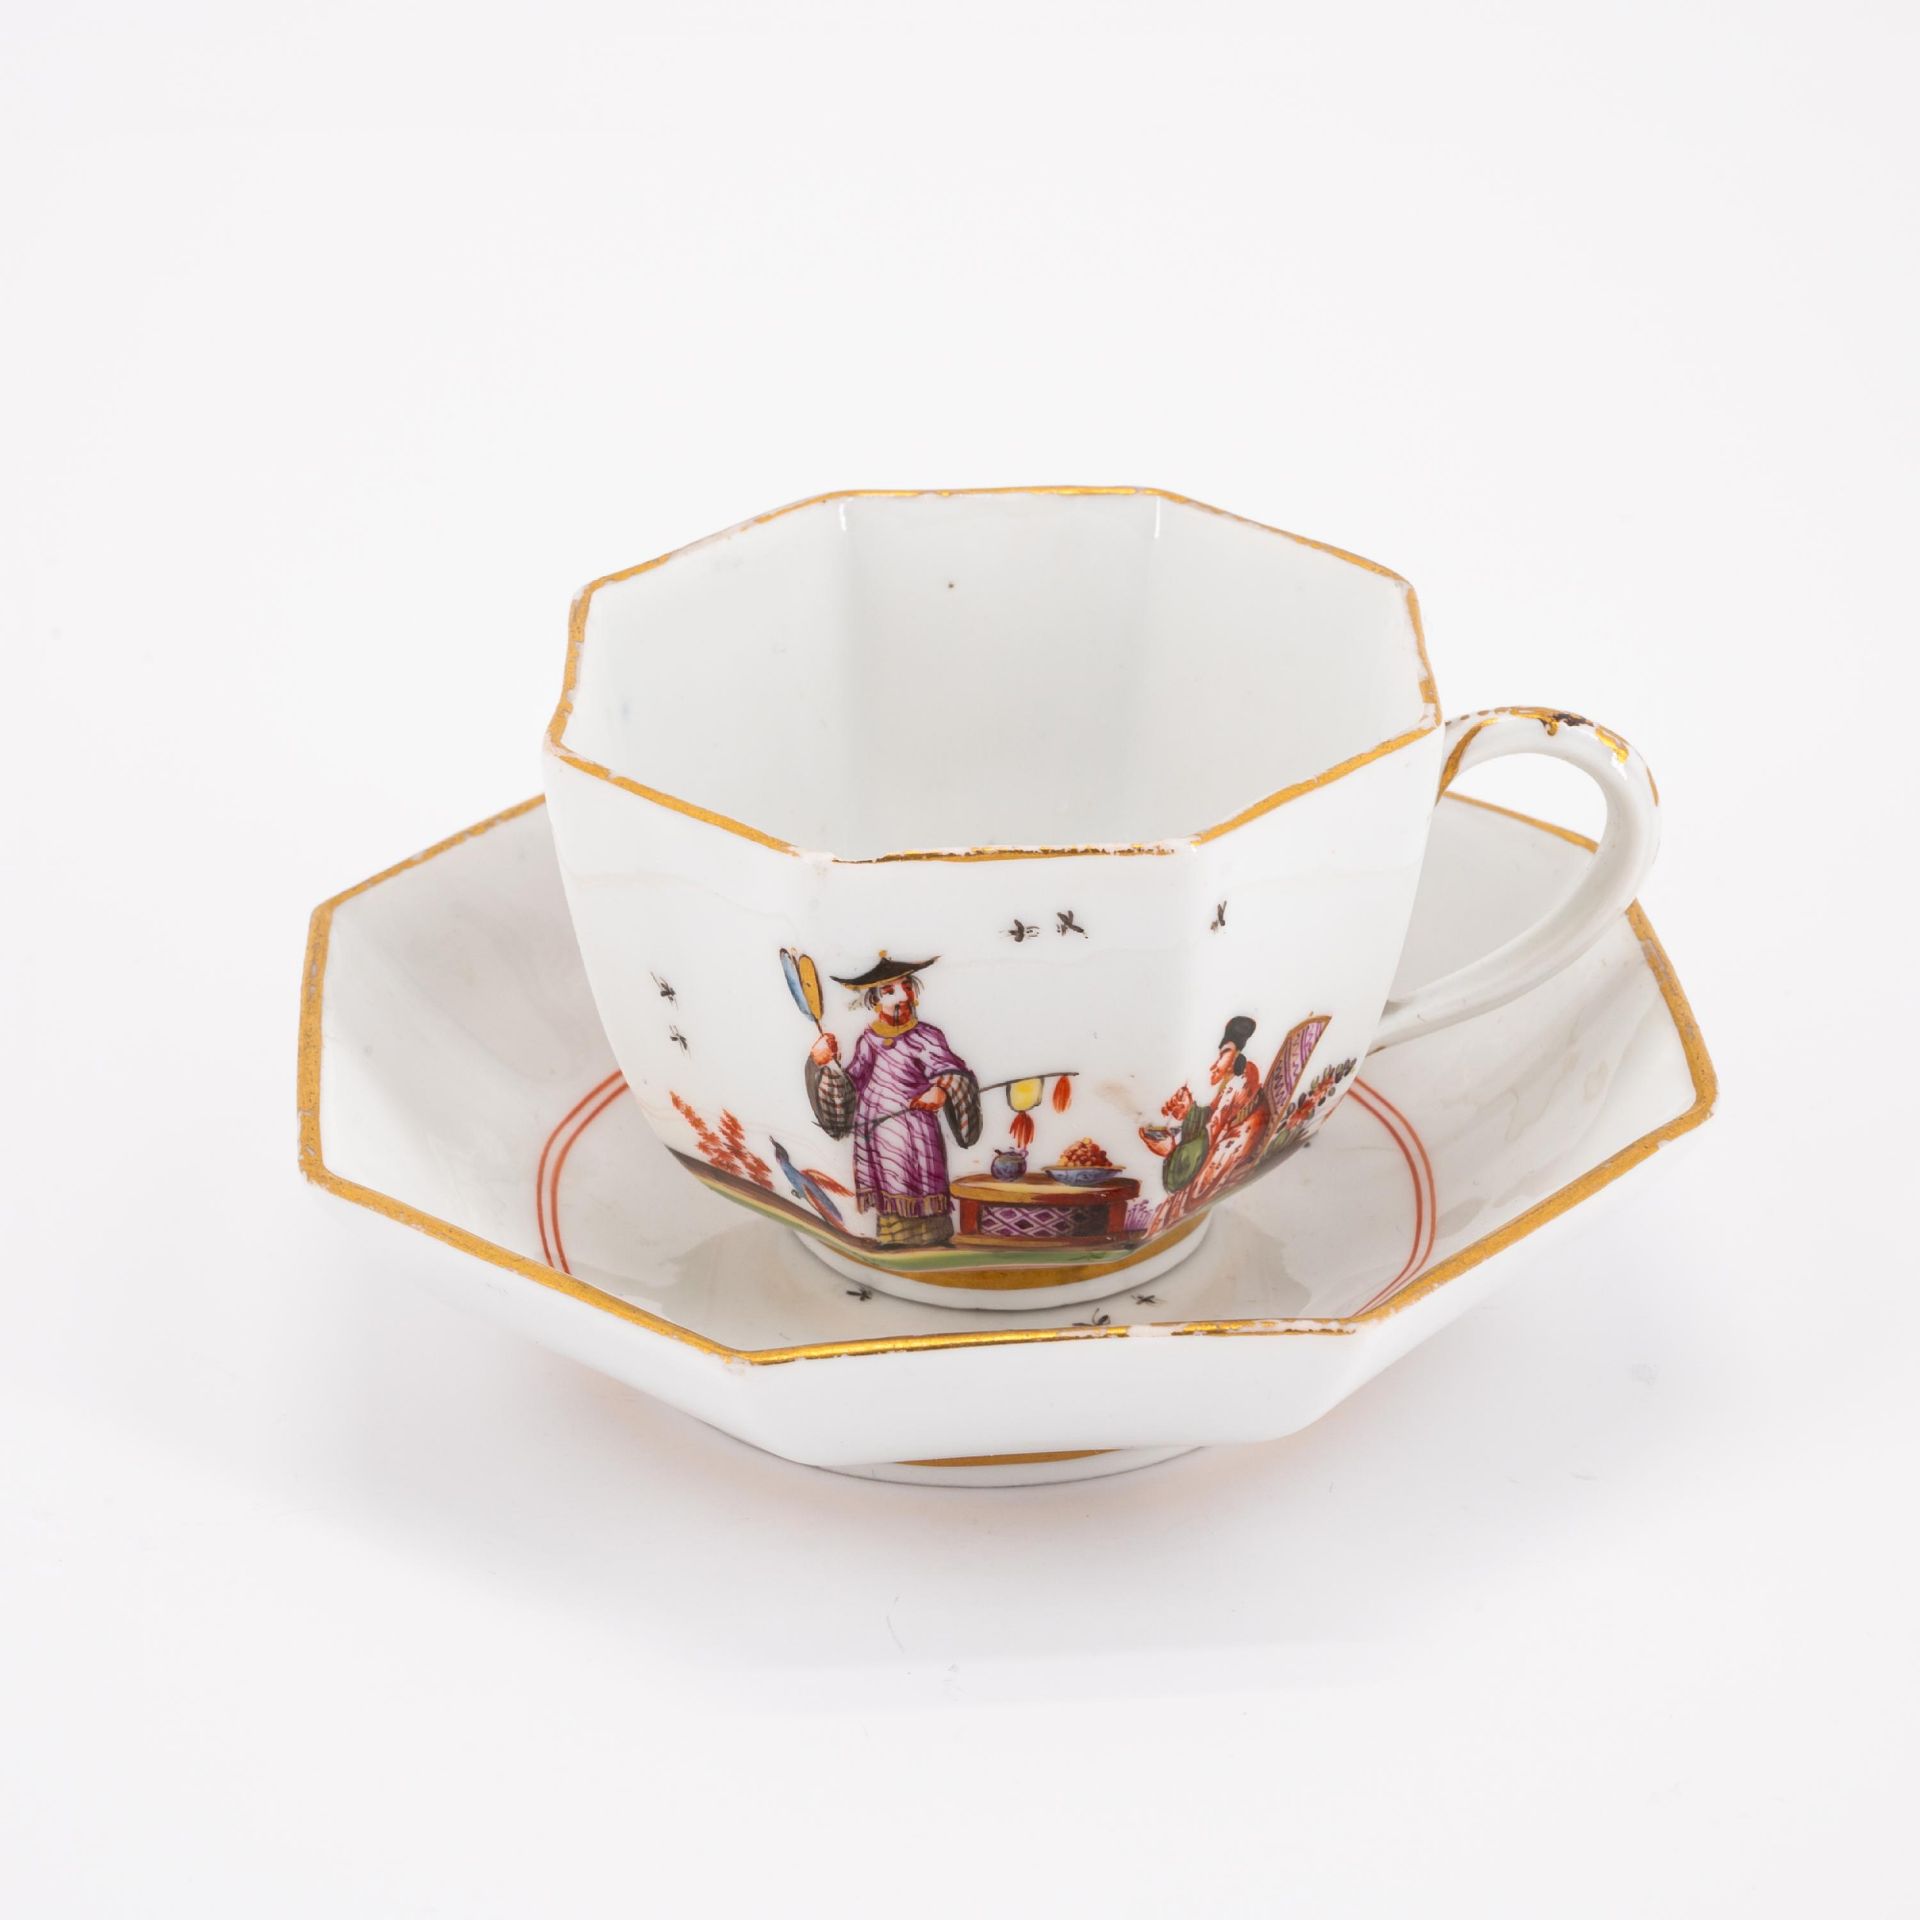 Meissen: OCTAGONAL PORCELAIN CUP AND SAUCER WITH CHINOISERIES - Image 3 of 6